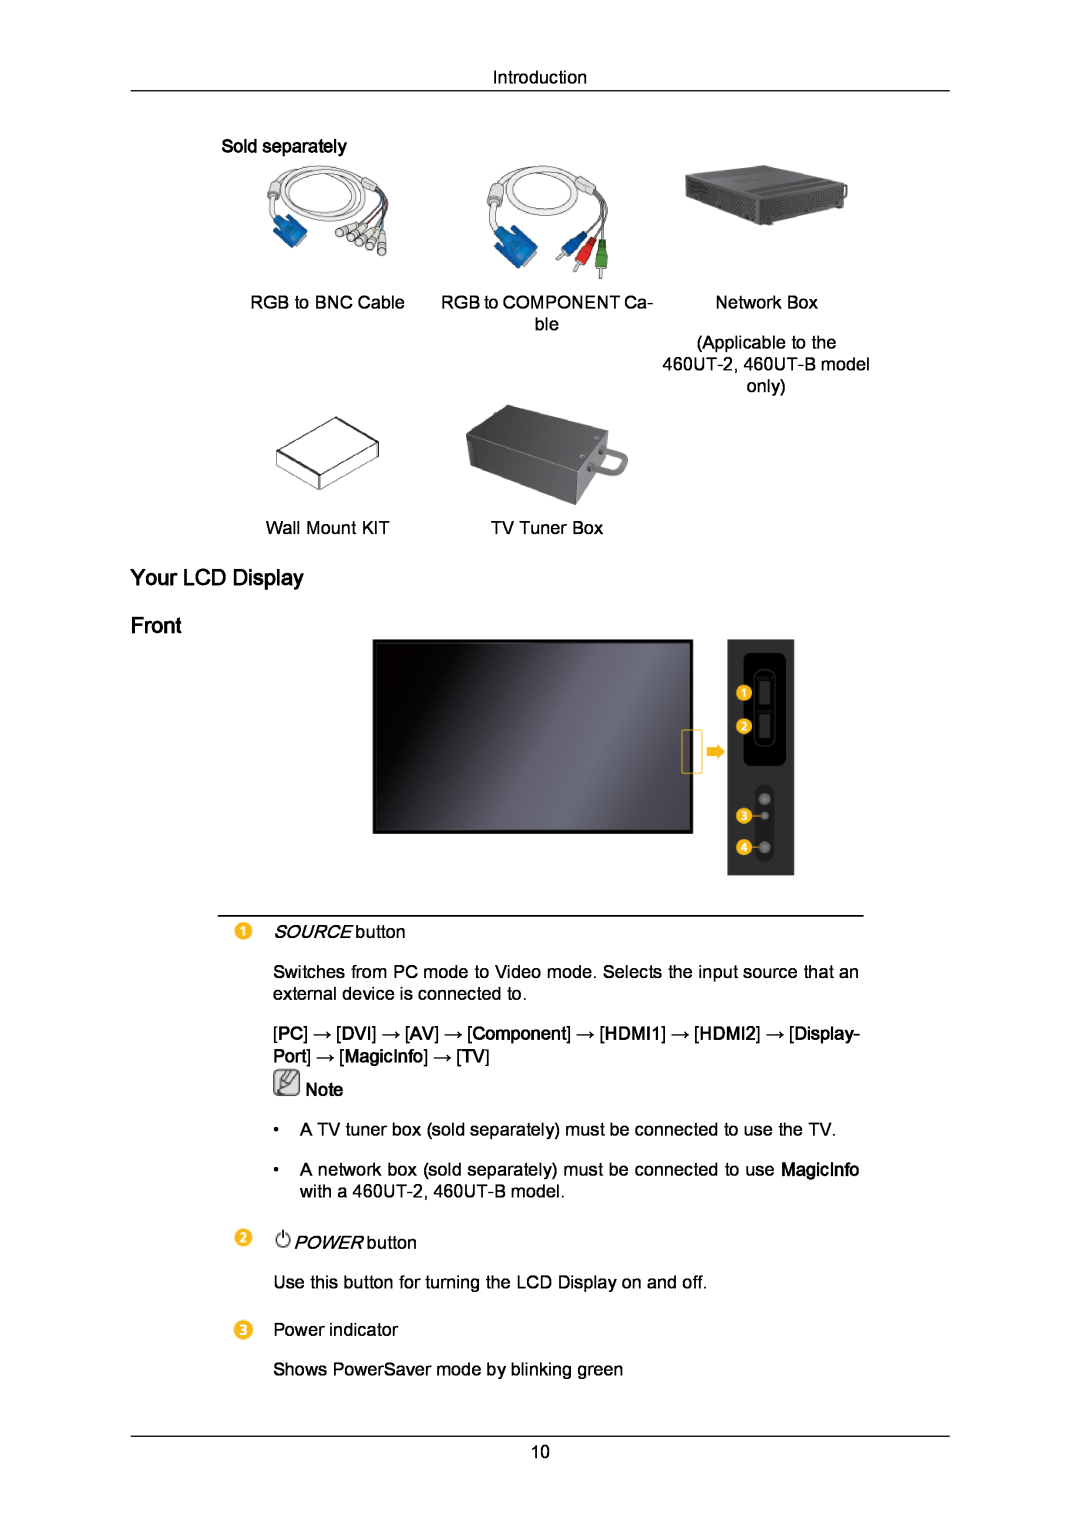 Samsung 460UT-2, 460UTN-B, 460UTN-2, 460UT-B user manual Your LCD Display Front, Sold separately, SOURCE button, POWER button 